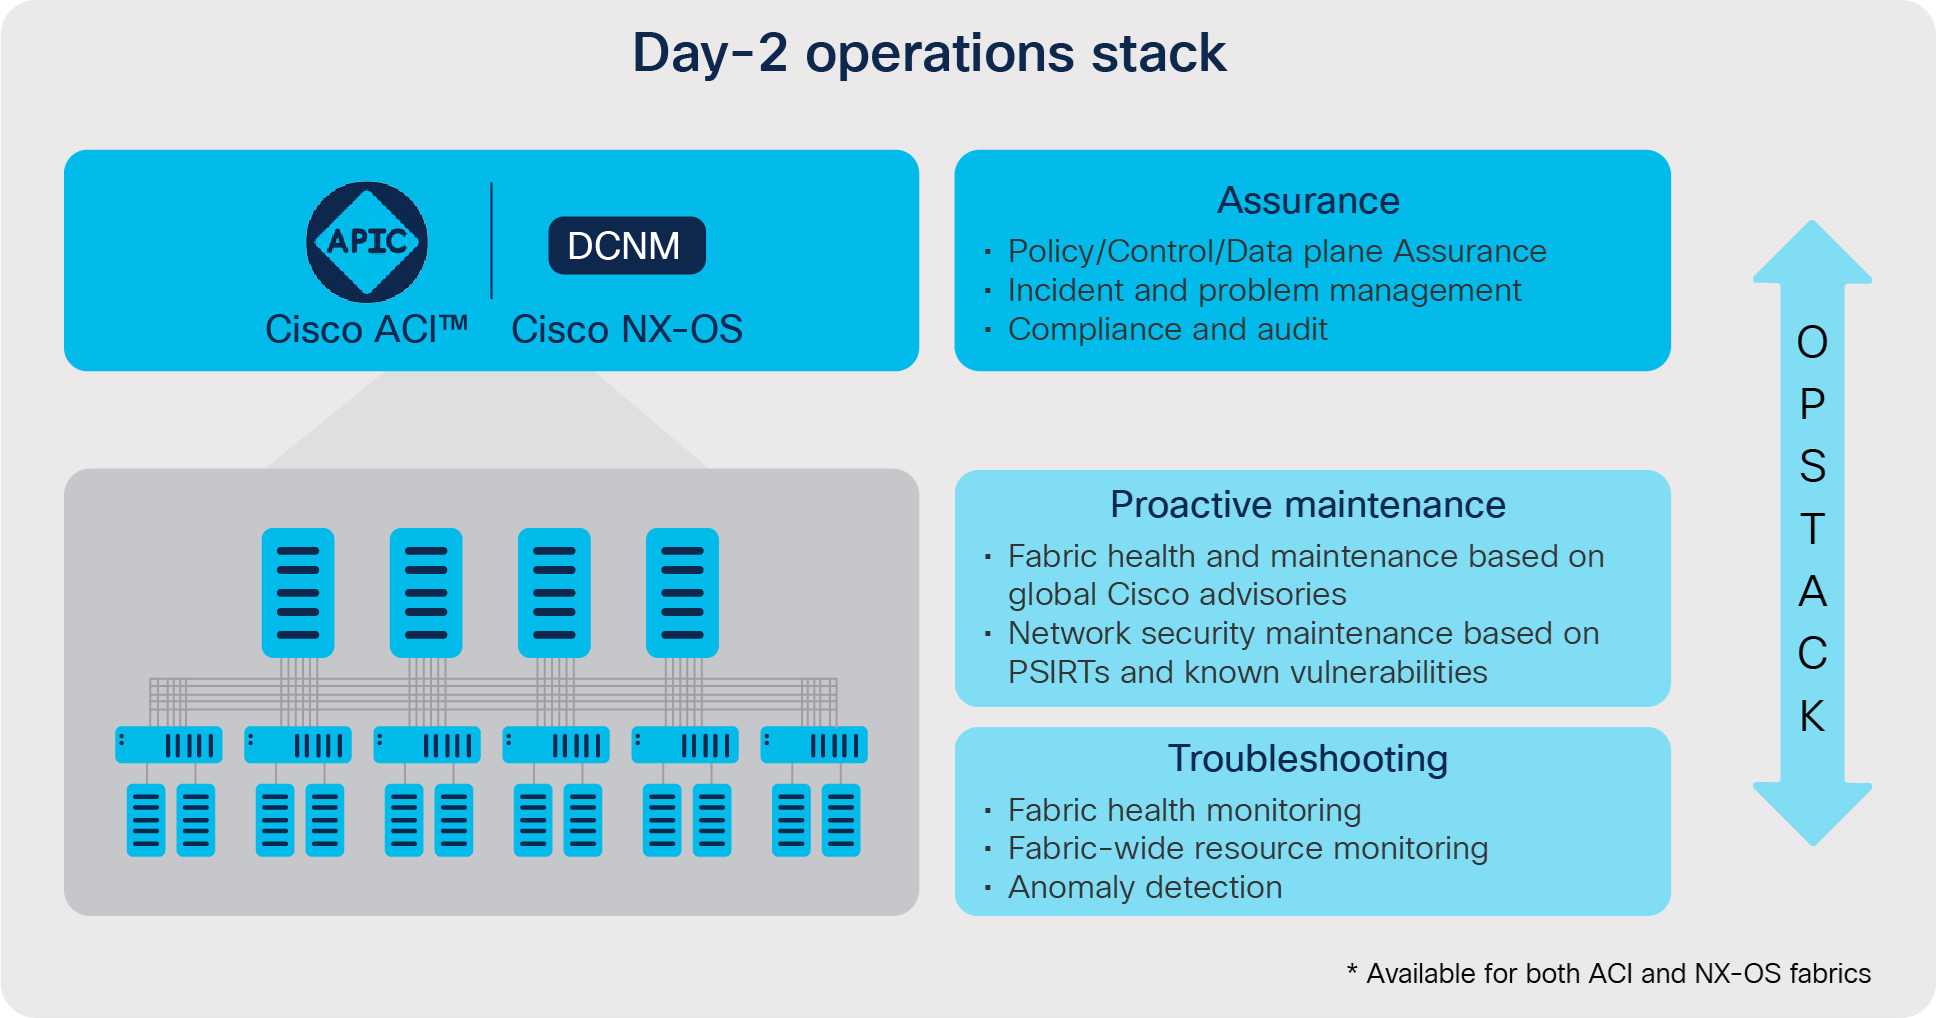 Day-2 operations stack